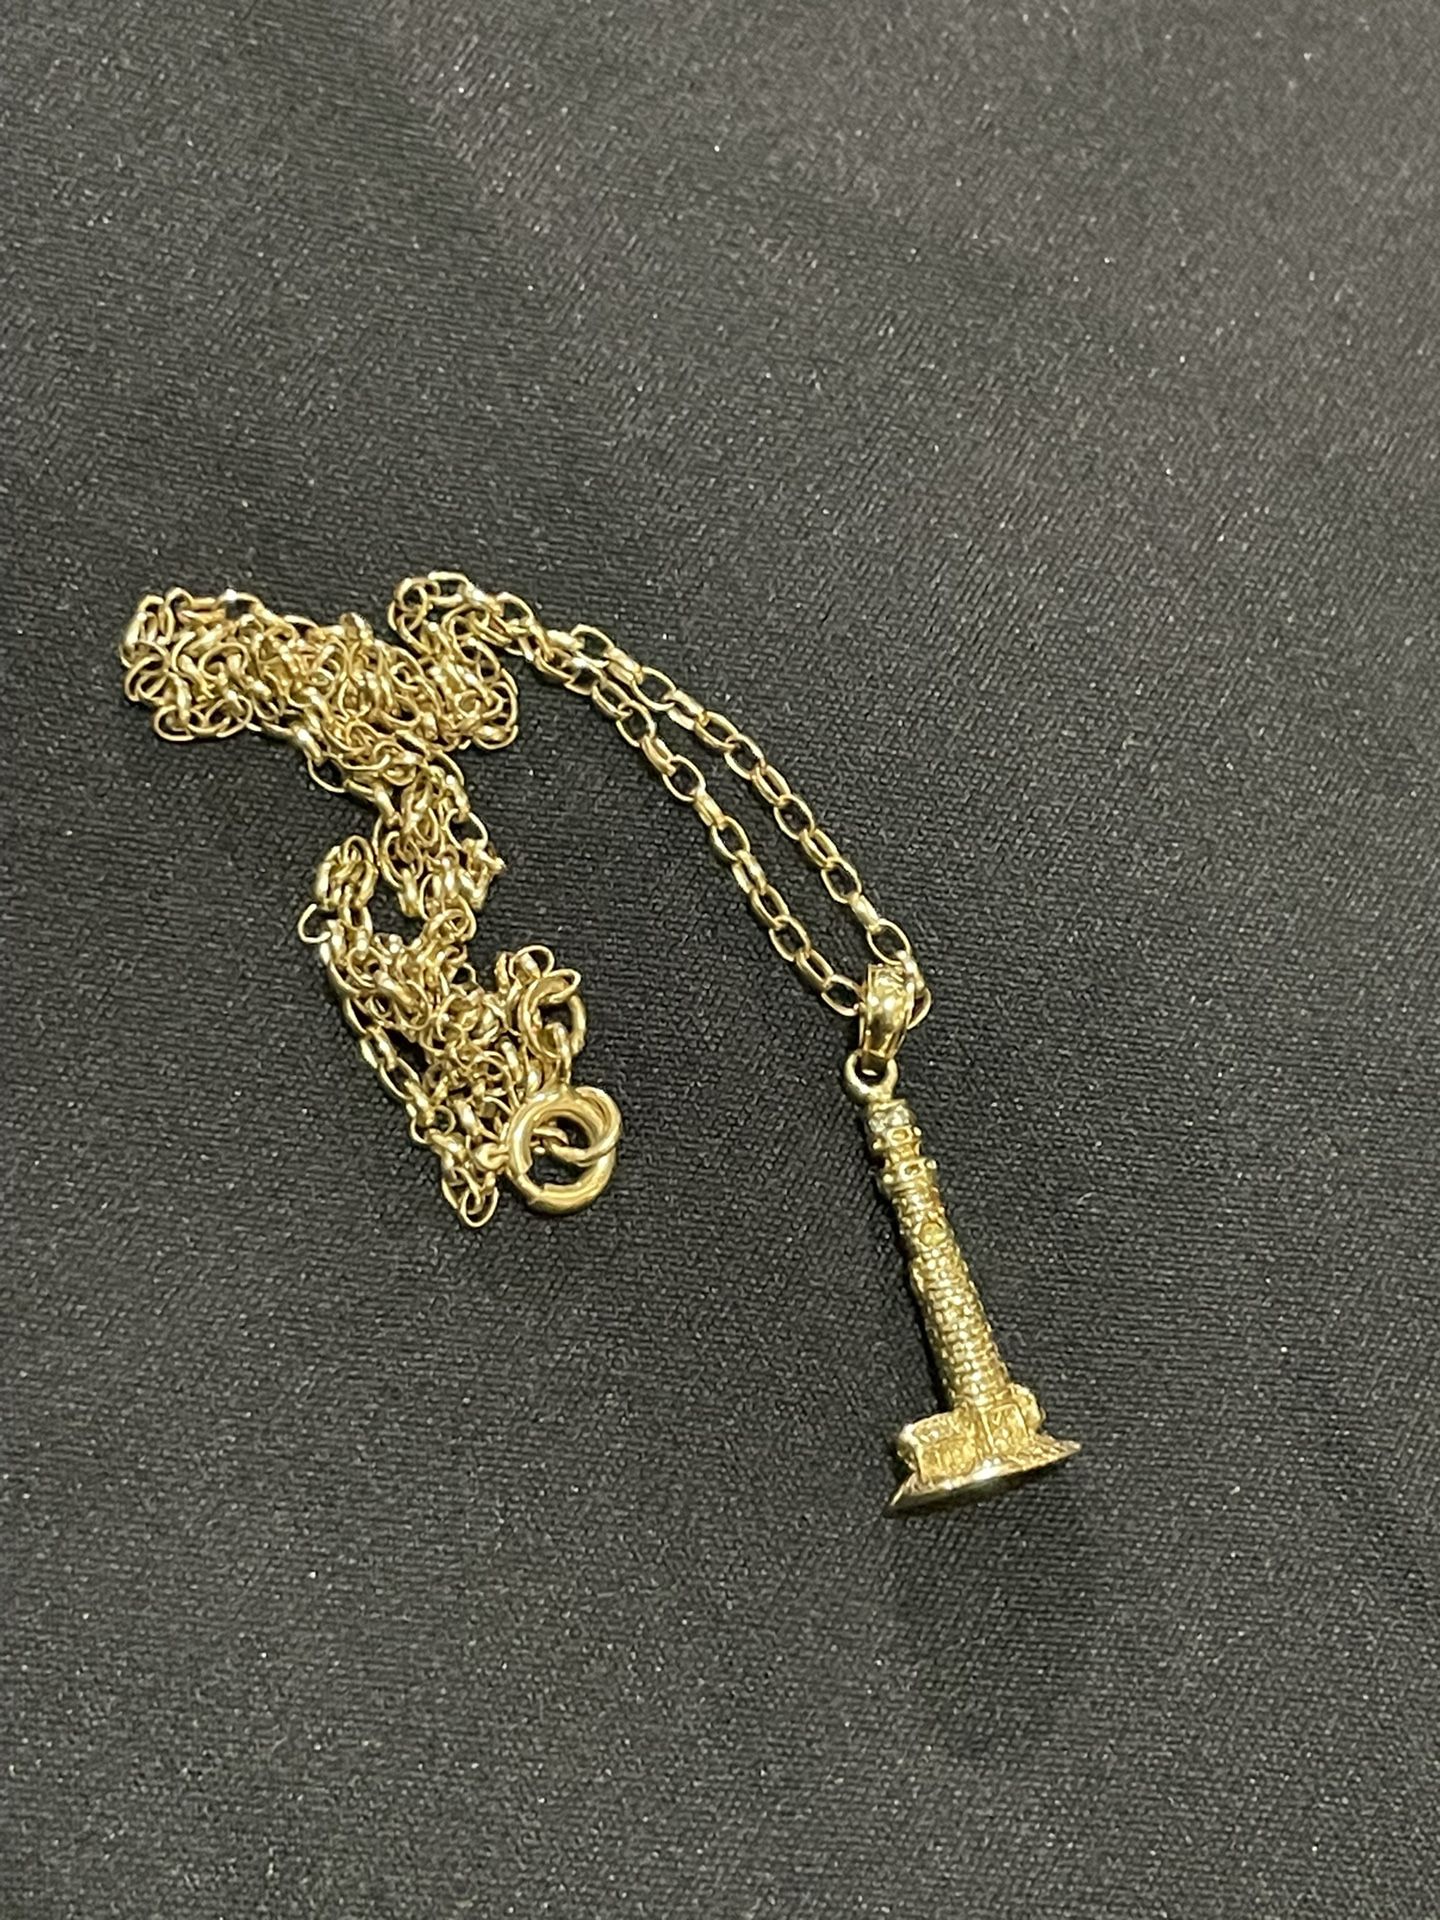 14kt Gold chain & 3 d Cape May Nj Lighthouse Charm Pendant